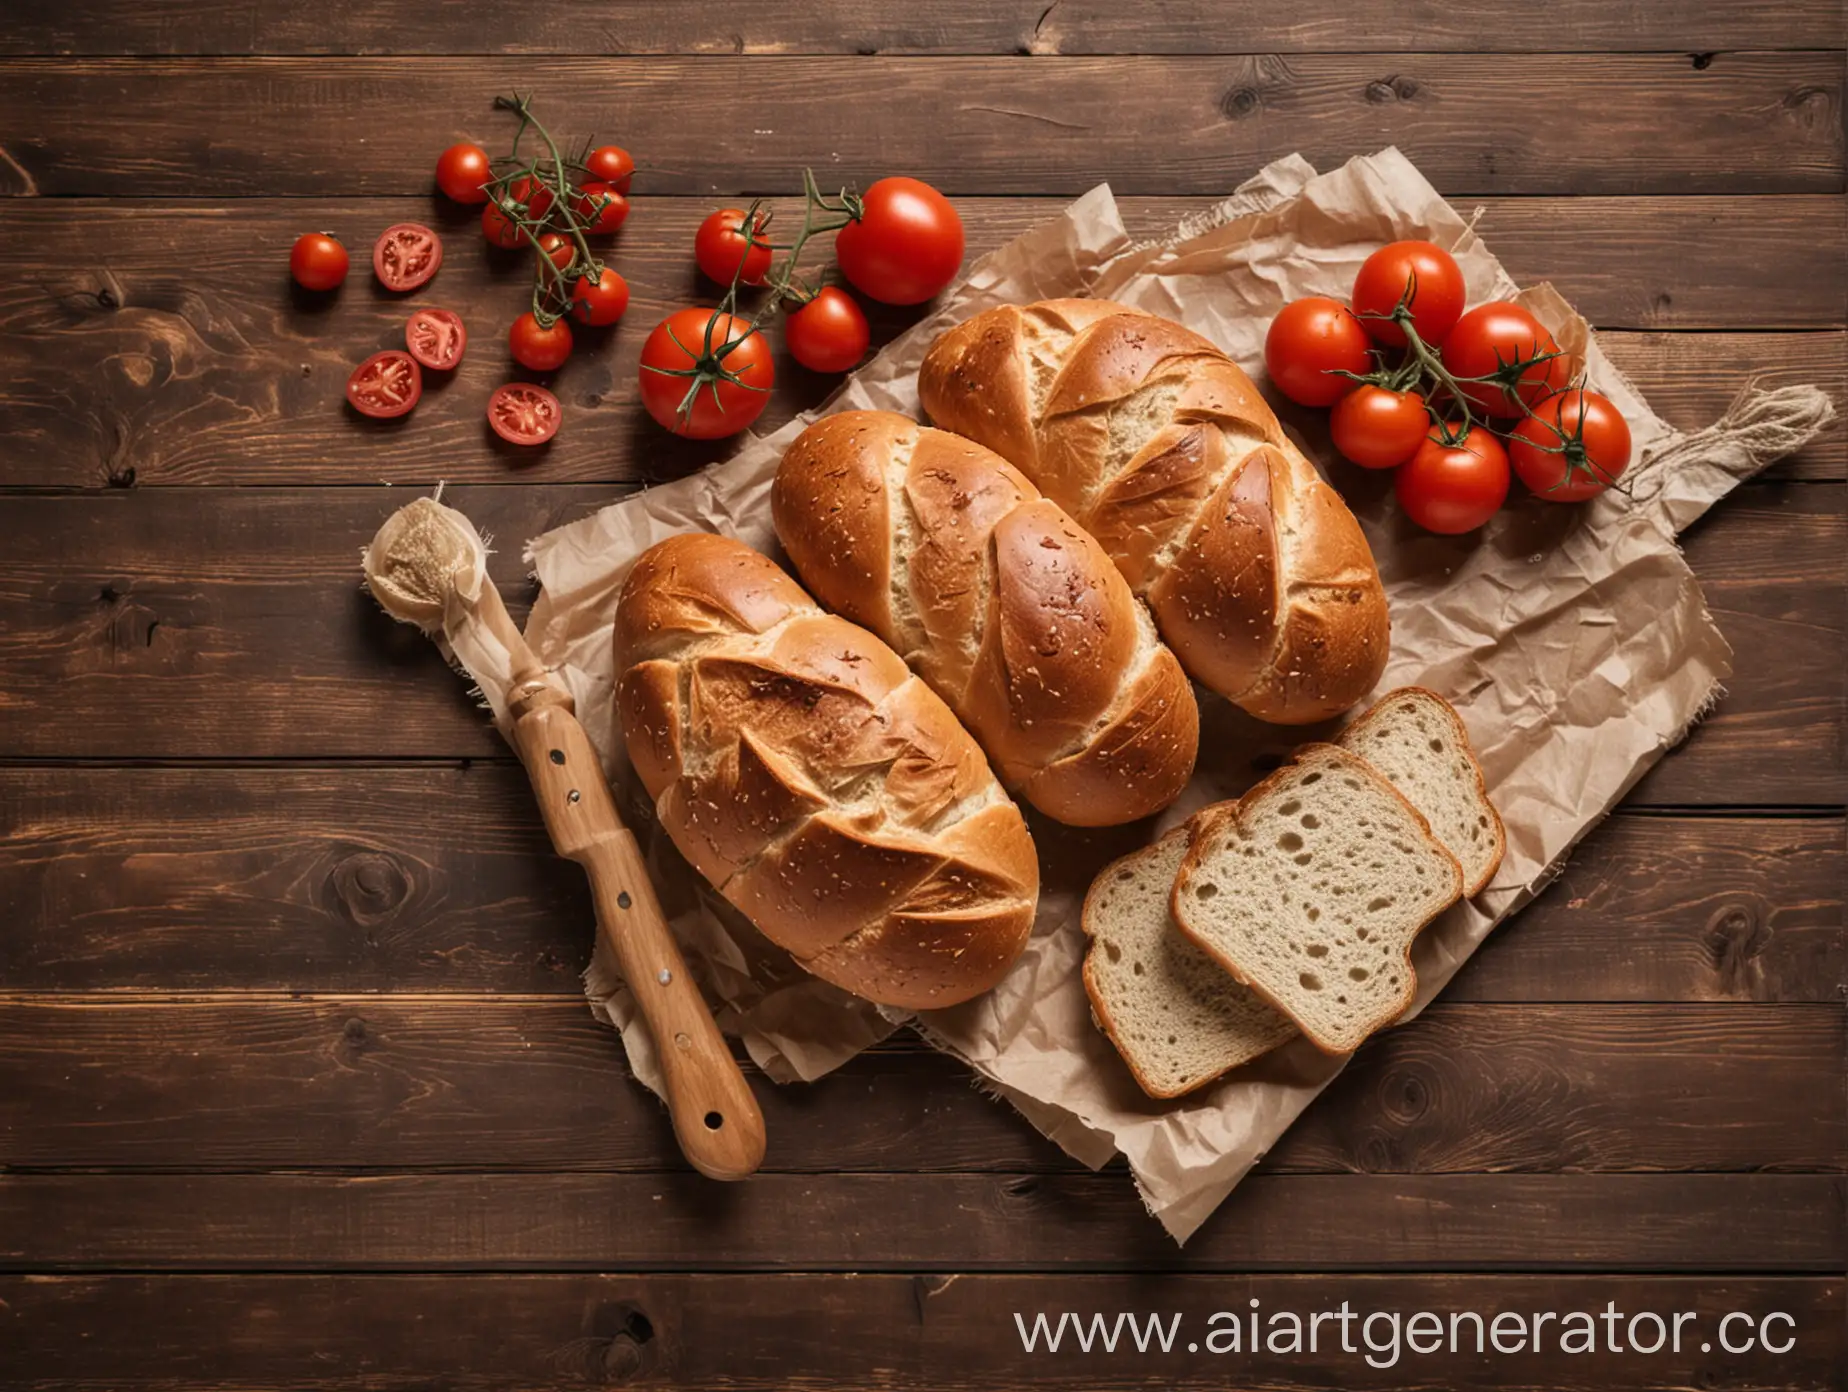 Fresh-Bread-and-Juicy-Tomatoes-Rustic-Ingredients-on-Wooden-Surface